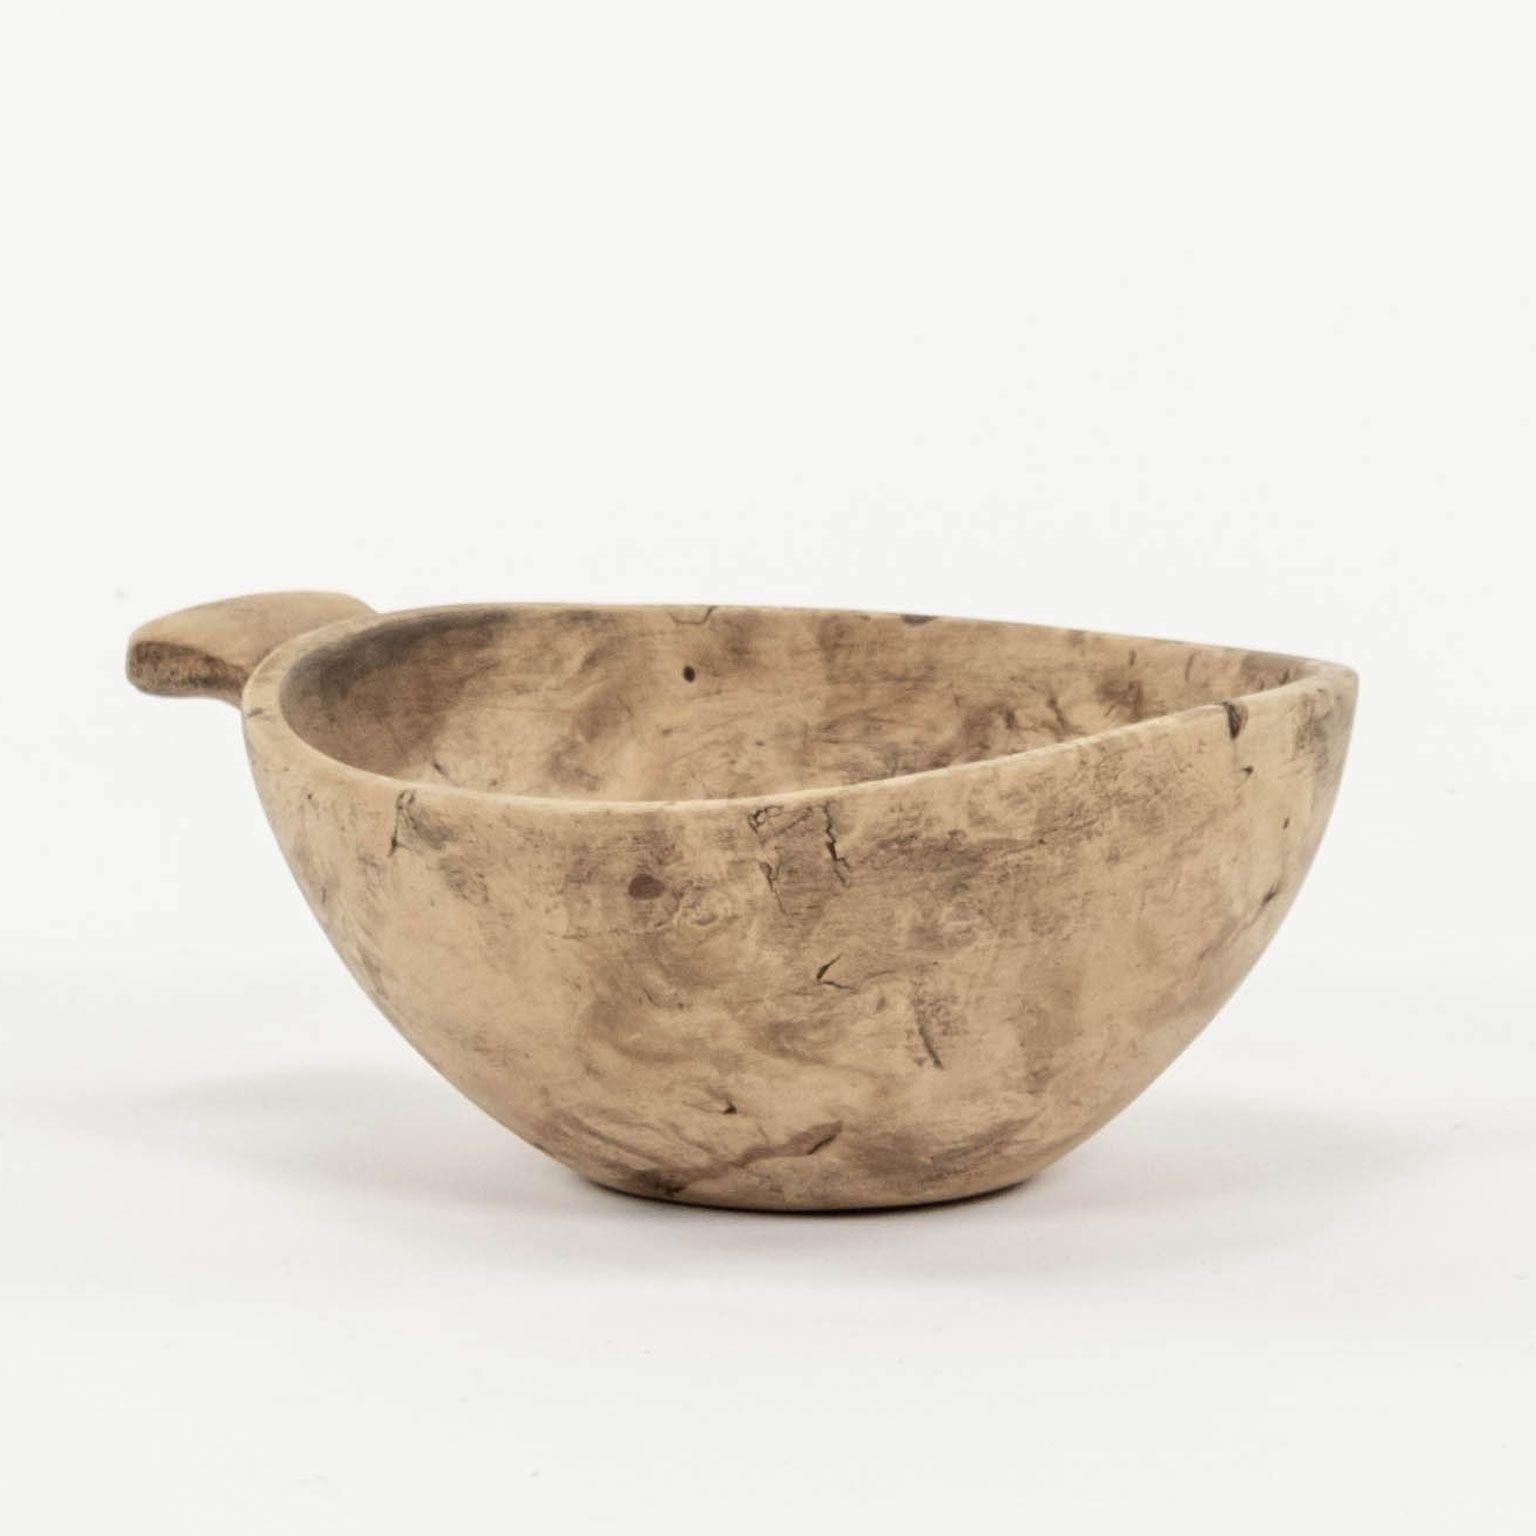 Bleached Swedish Lapland ale bowl with handle. Hand-carved sycamore with scrubbed surface.

Note: Original/early finish on antique and vintage metal will include some, or all, of the following: patina, scaling, light rust, discoloration, and